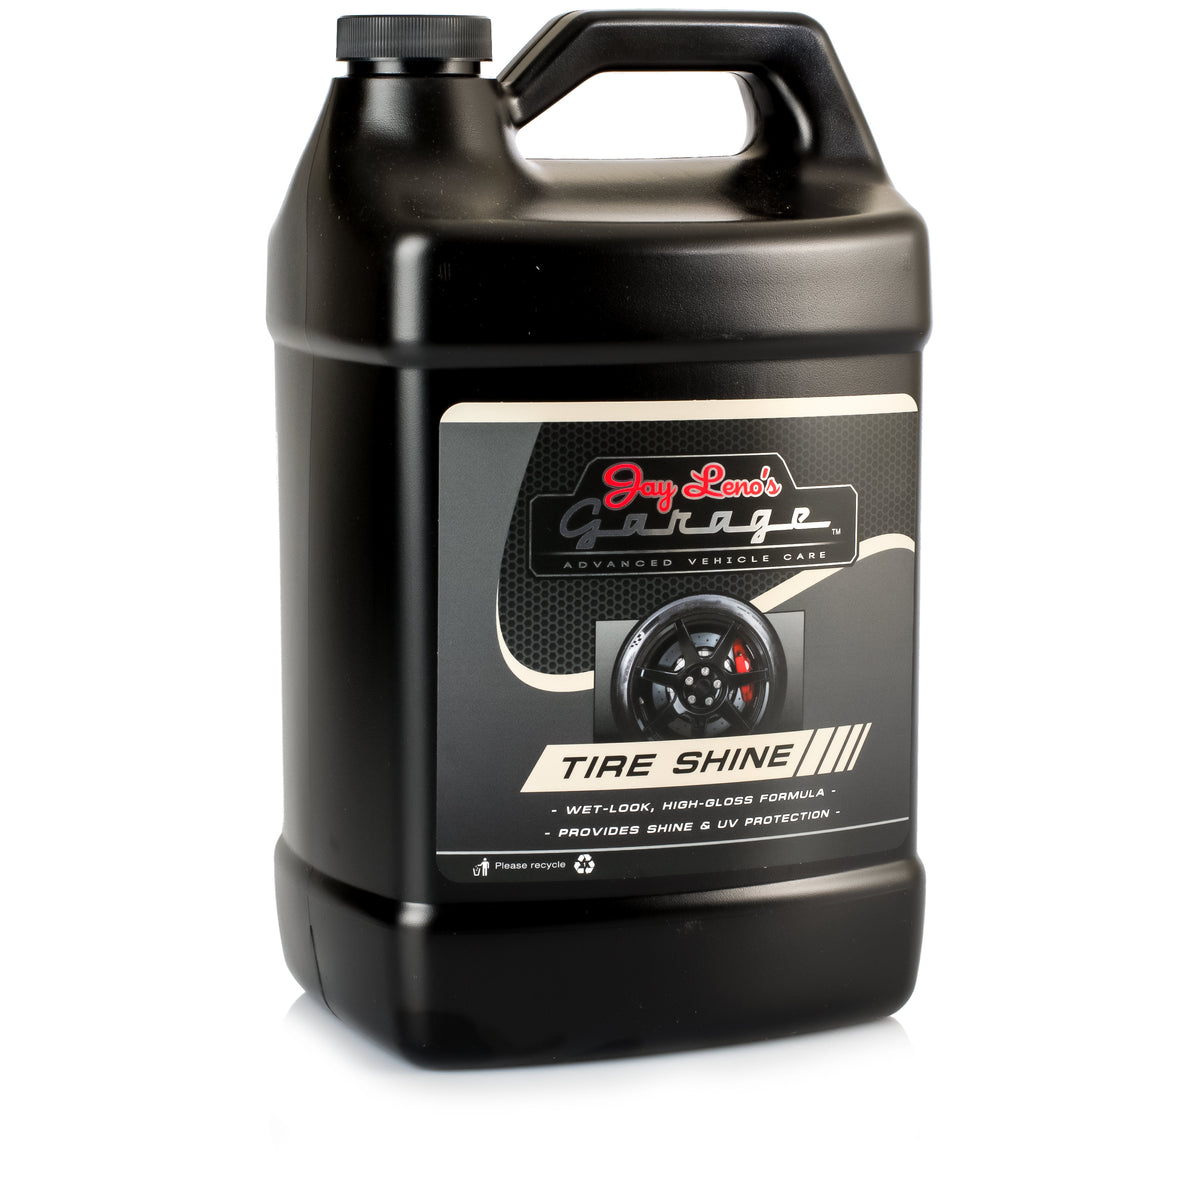 NU-TIRE Permanent Tire Shine, no sling, repels water and dirt, longest  lasting